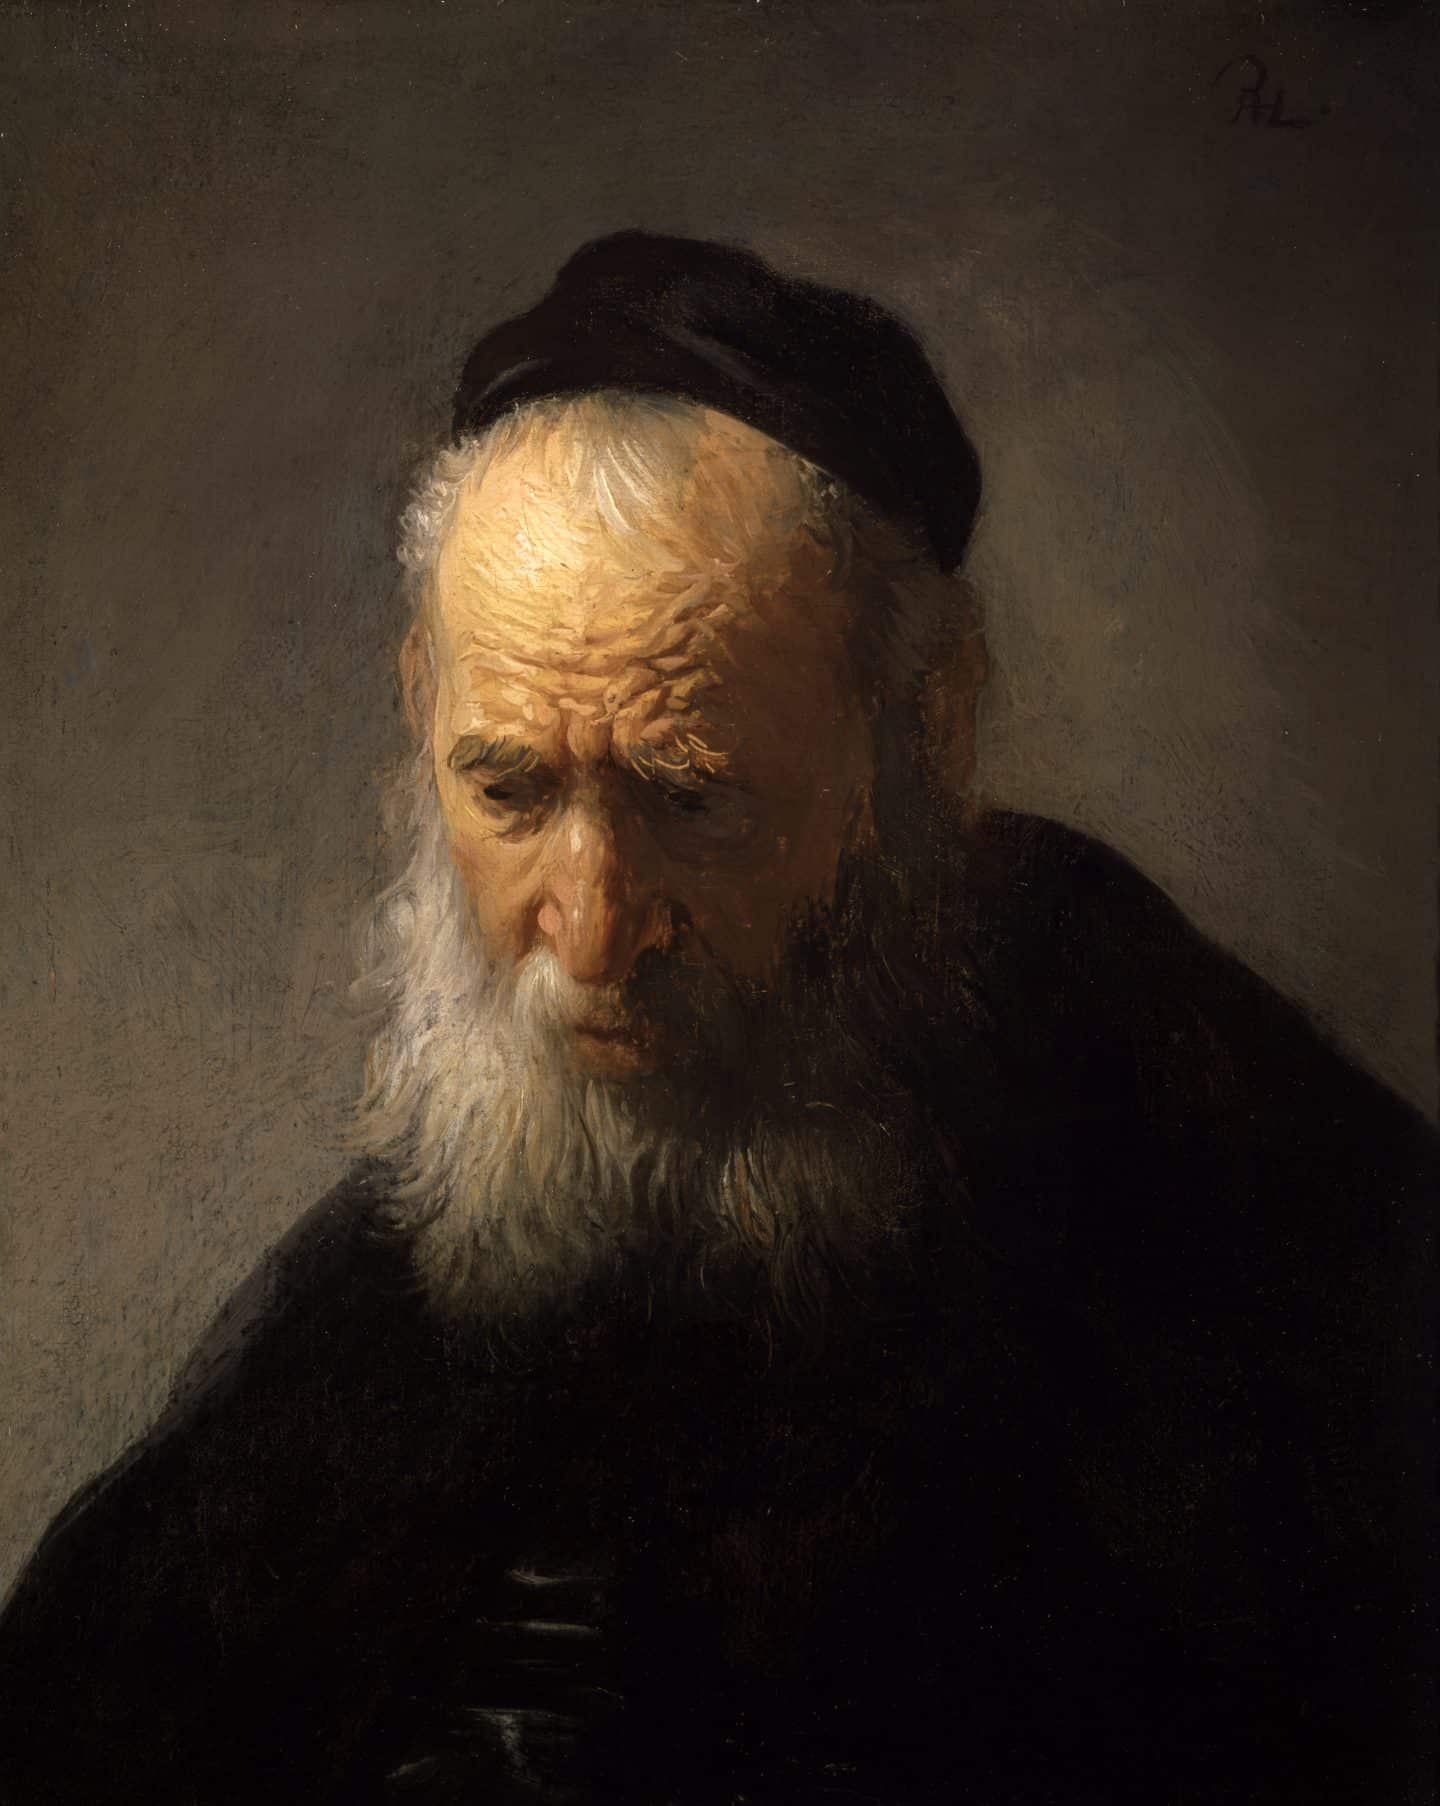 Rembrandt van Rijn, Head of an Old Man in a Cap, around 1630, oil on panel. Gift of Alfred and Isabel Bader, 2003 (46-031)